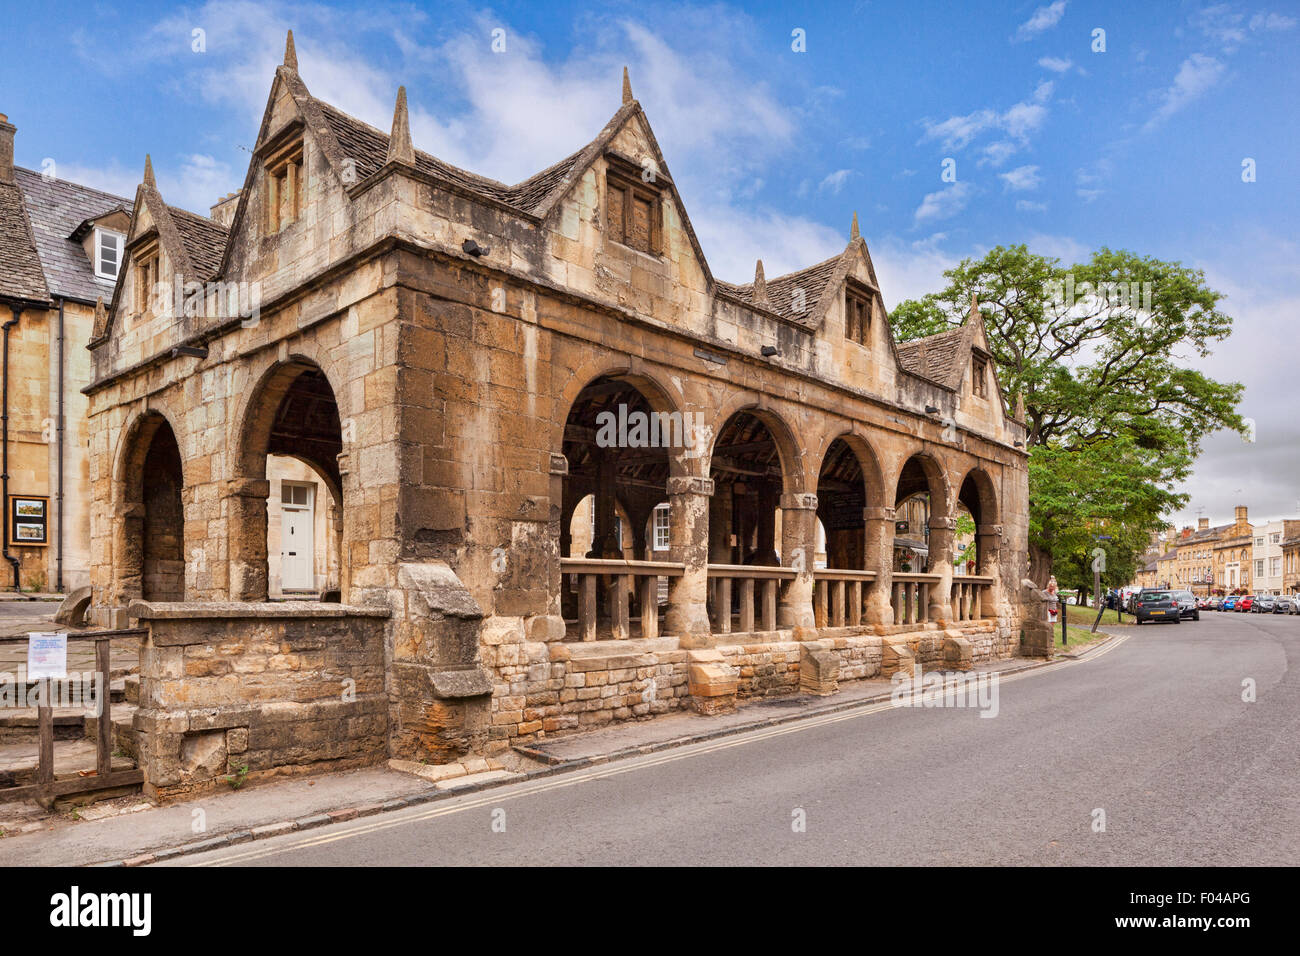 L'ancienne halle, Chipping Campden, Oxfordshire, Angleterre Banque D'Images